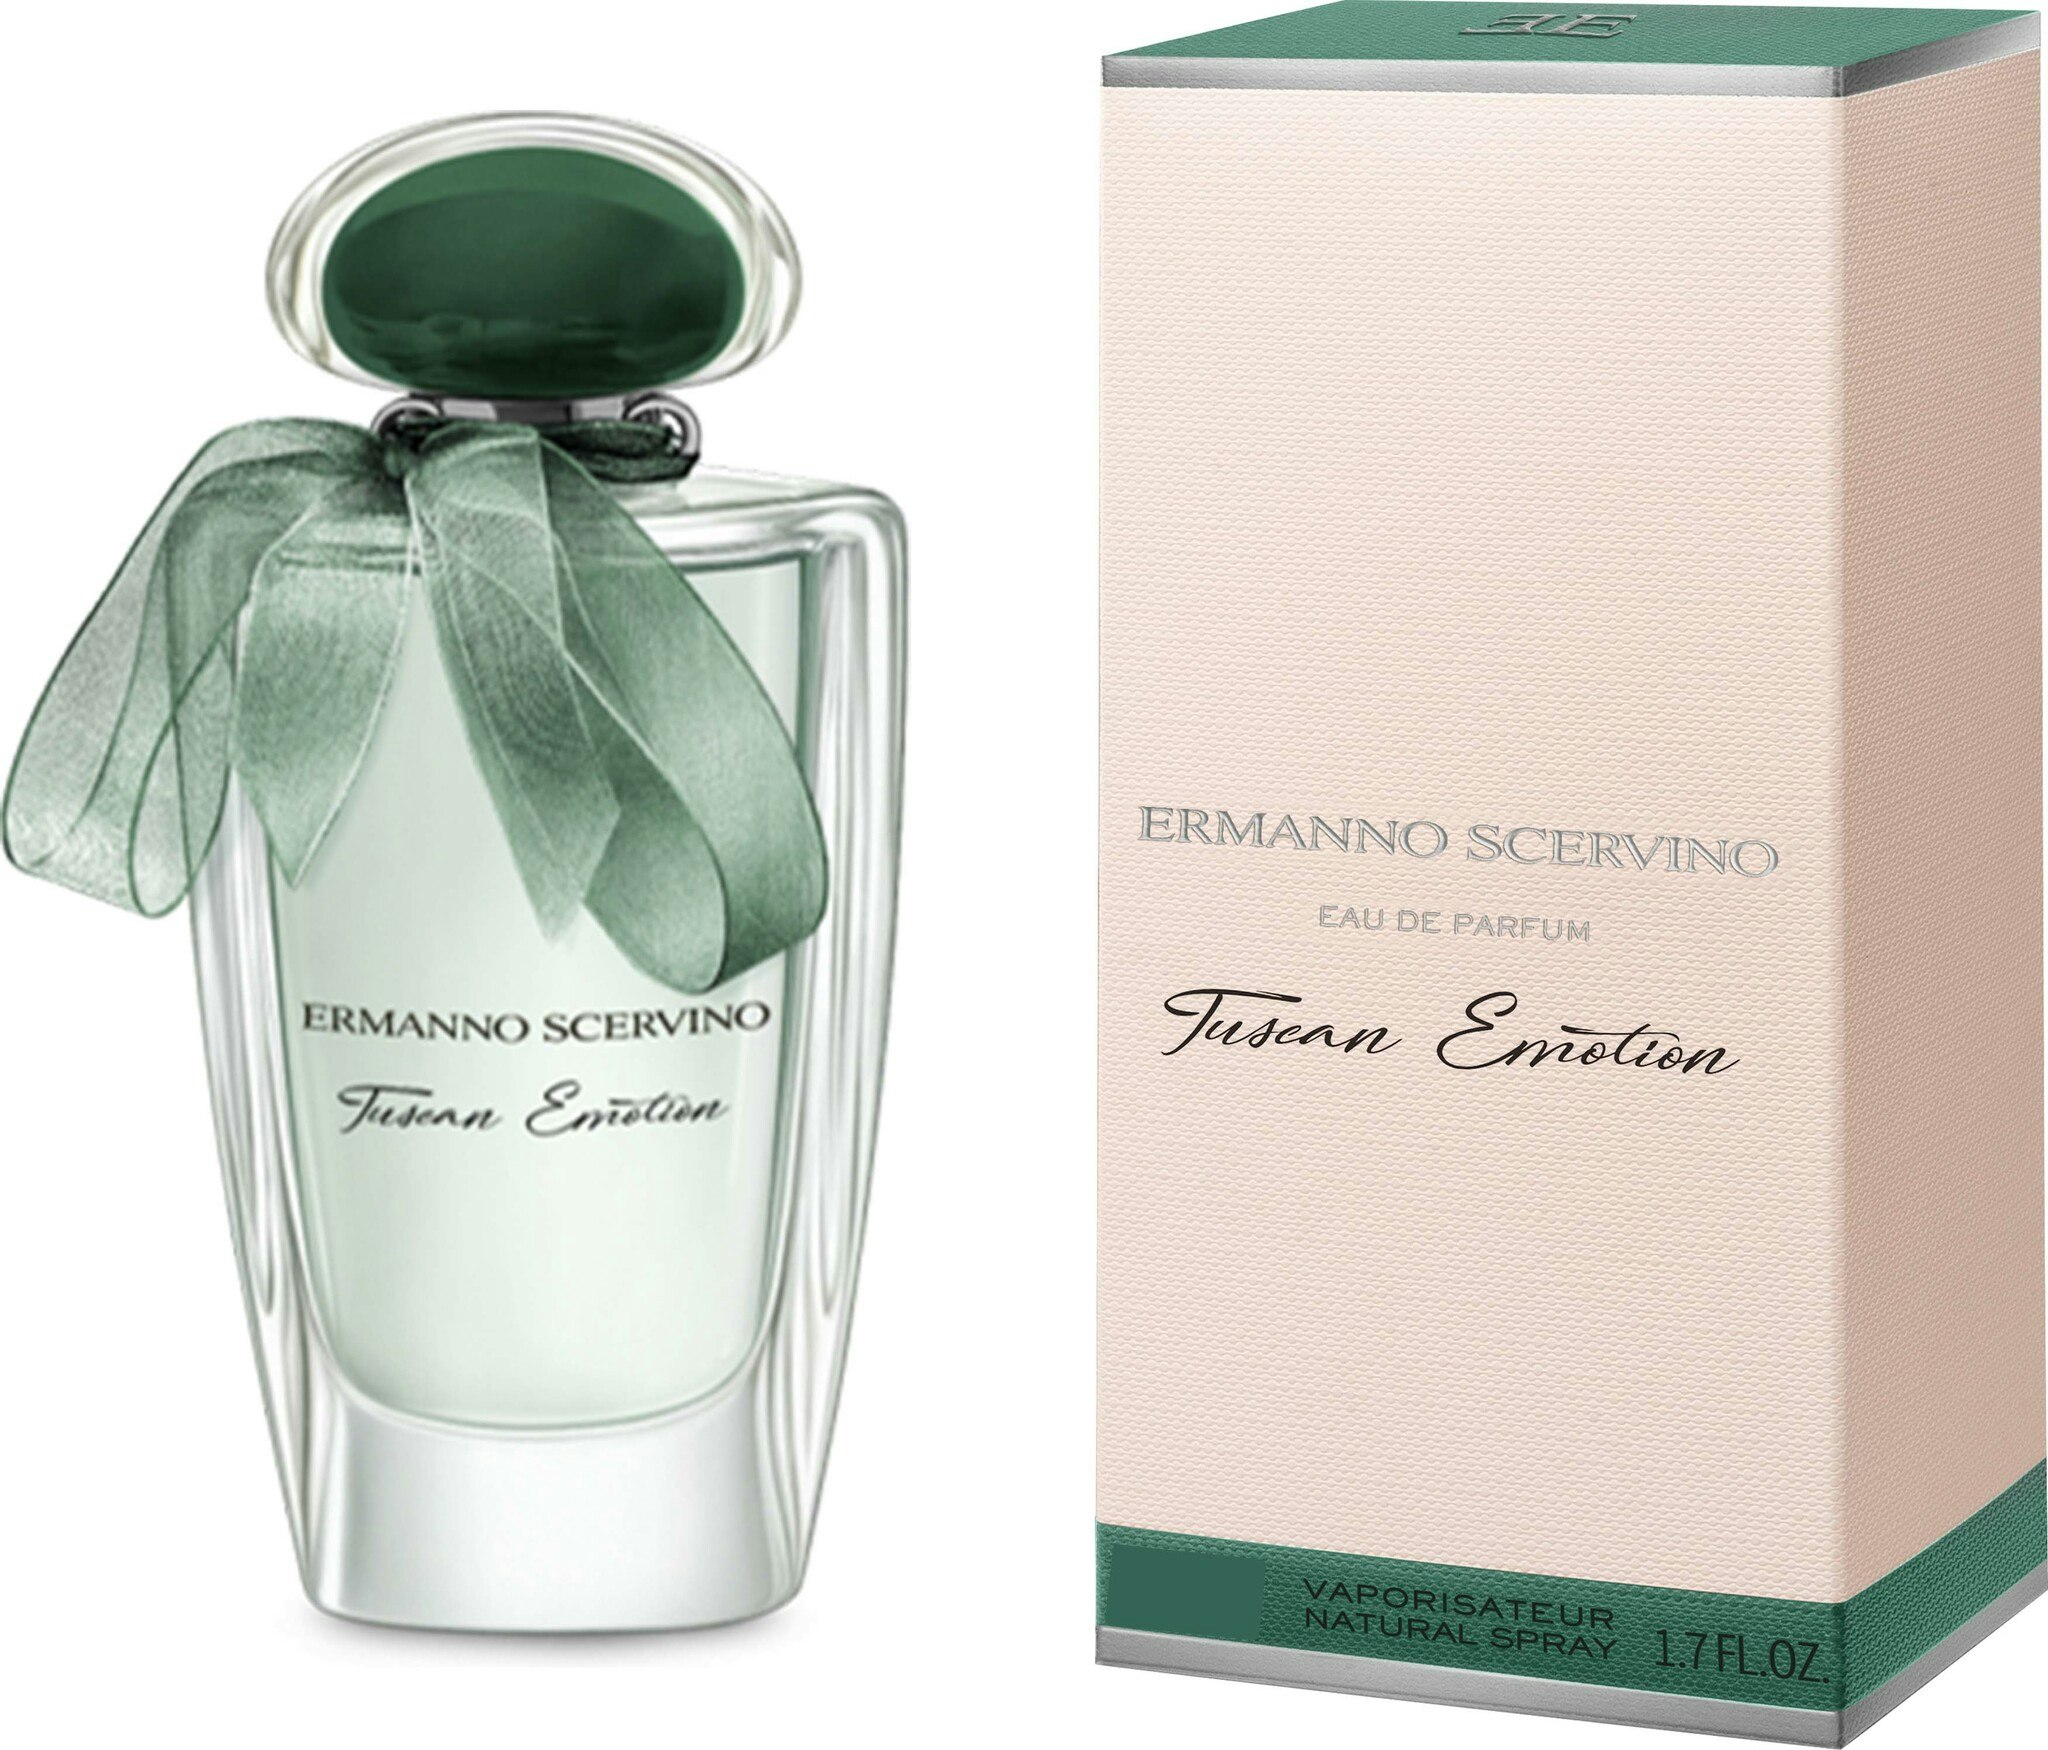 Ermanno Scervino Tuscan Emotion for Woman